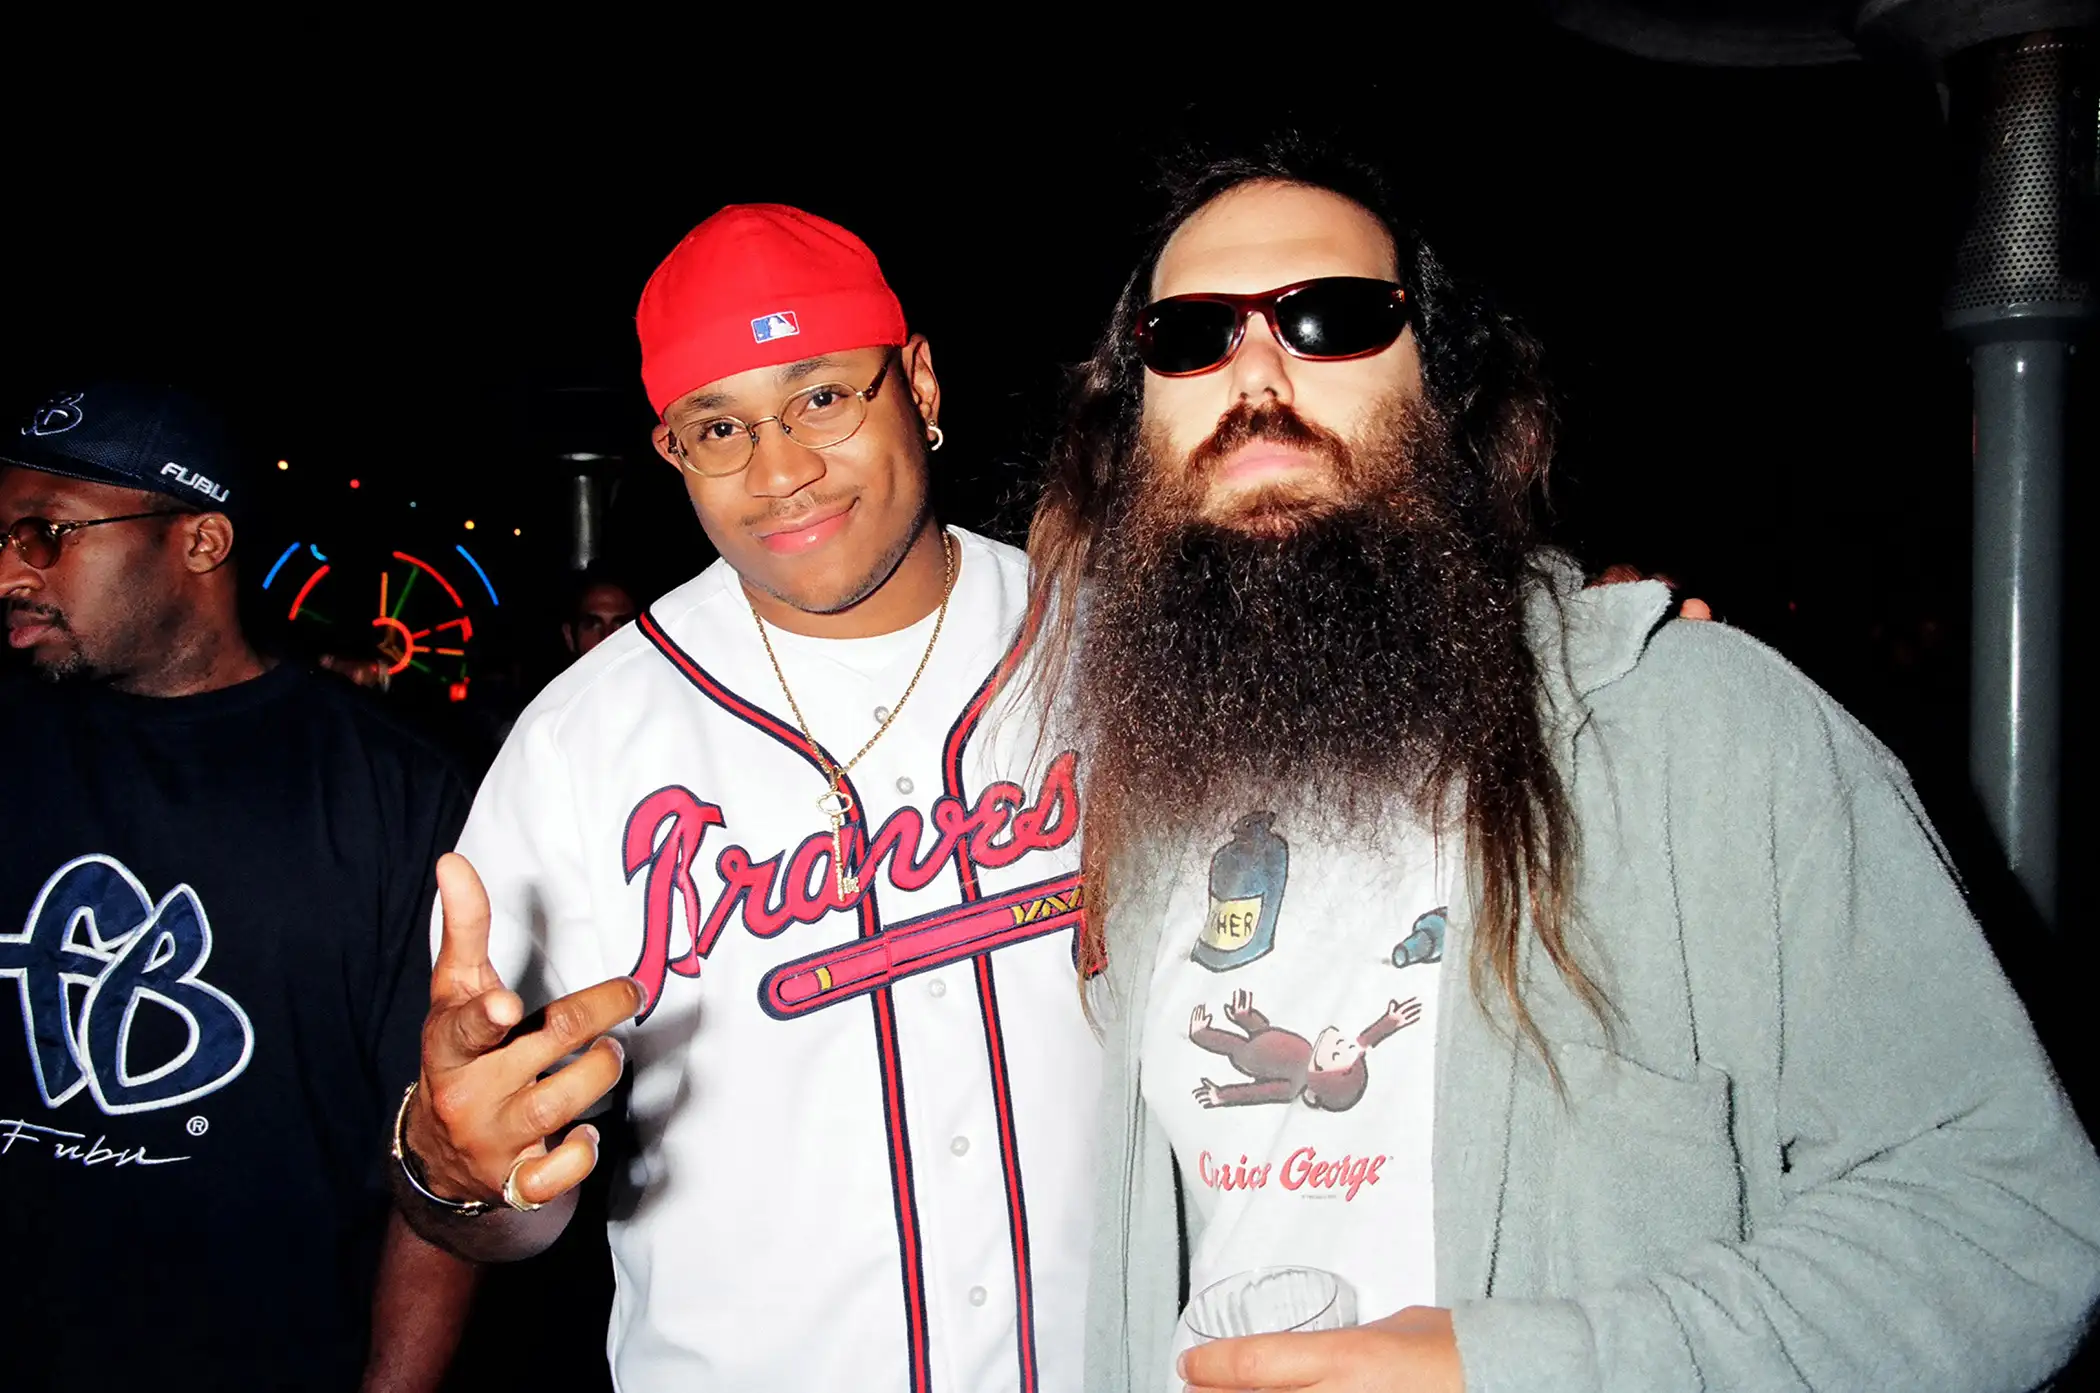 LL Cool J and Rick Rubin during MTV Life Beat in Los Angeles, September 7, 1997.